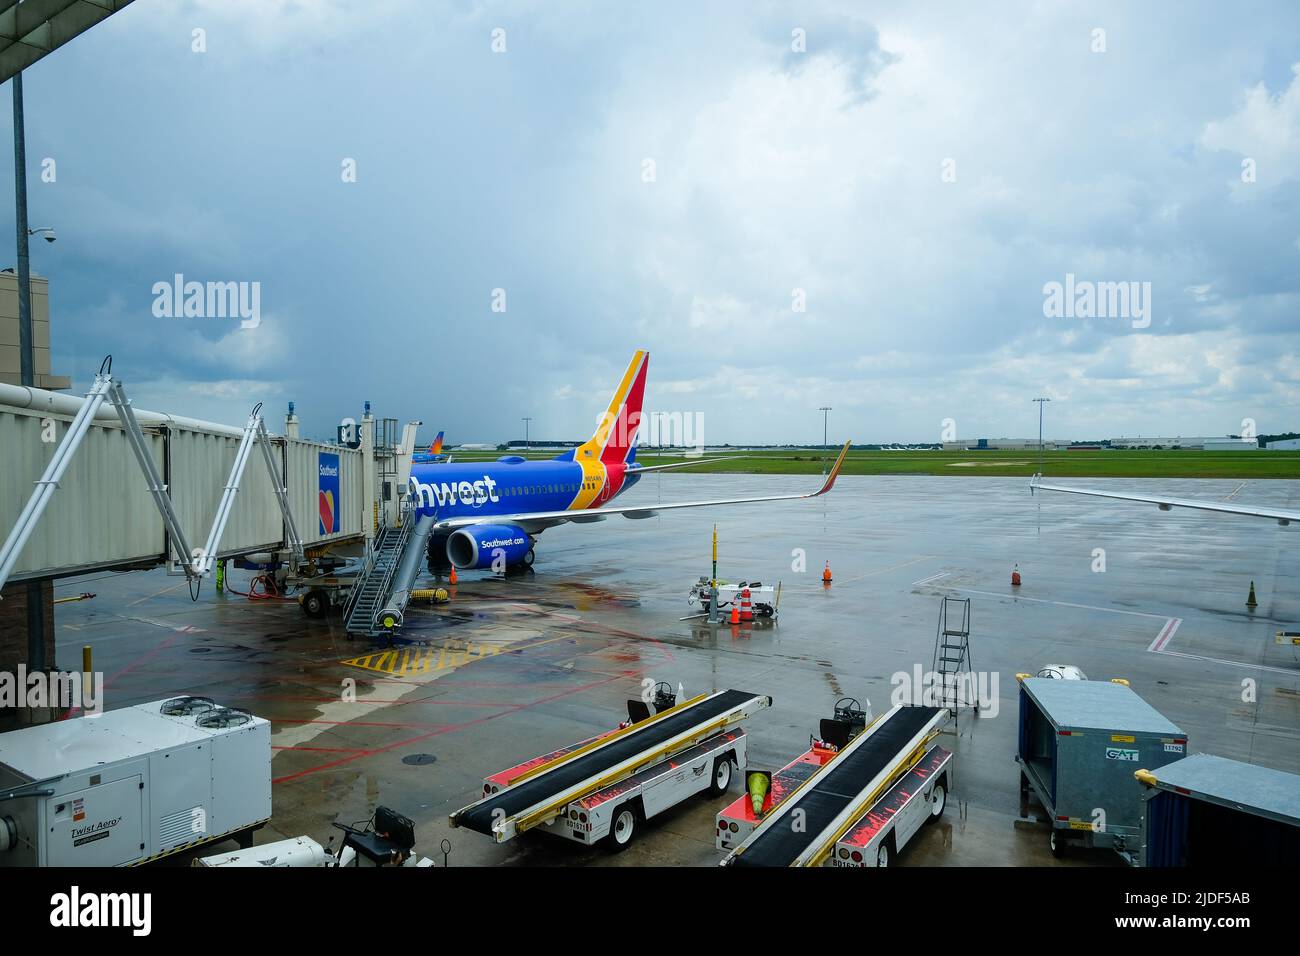 Stock images of South West Airlines at airport gate during weather delays. Airplane at gate in service. Stock Photo